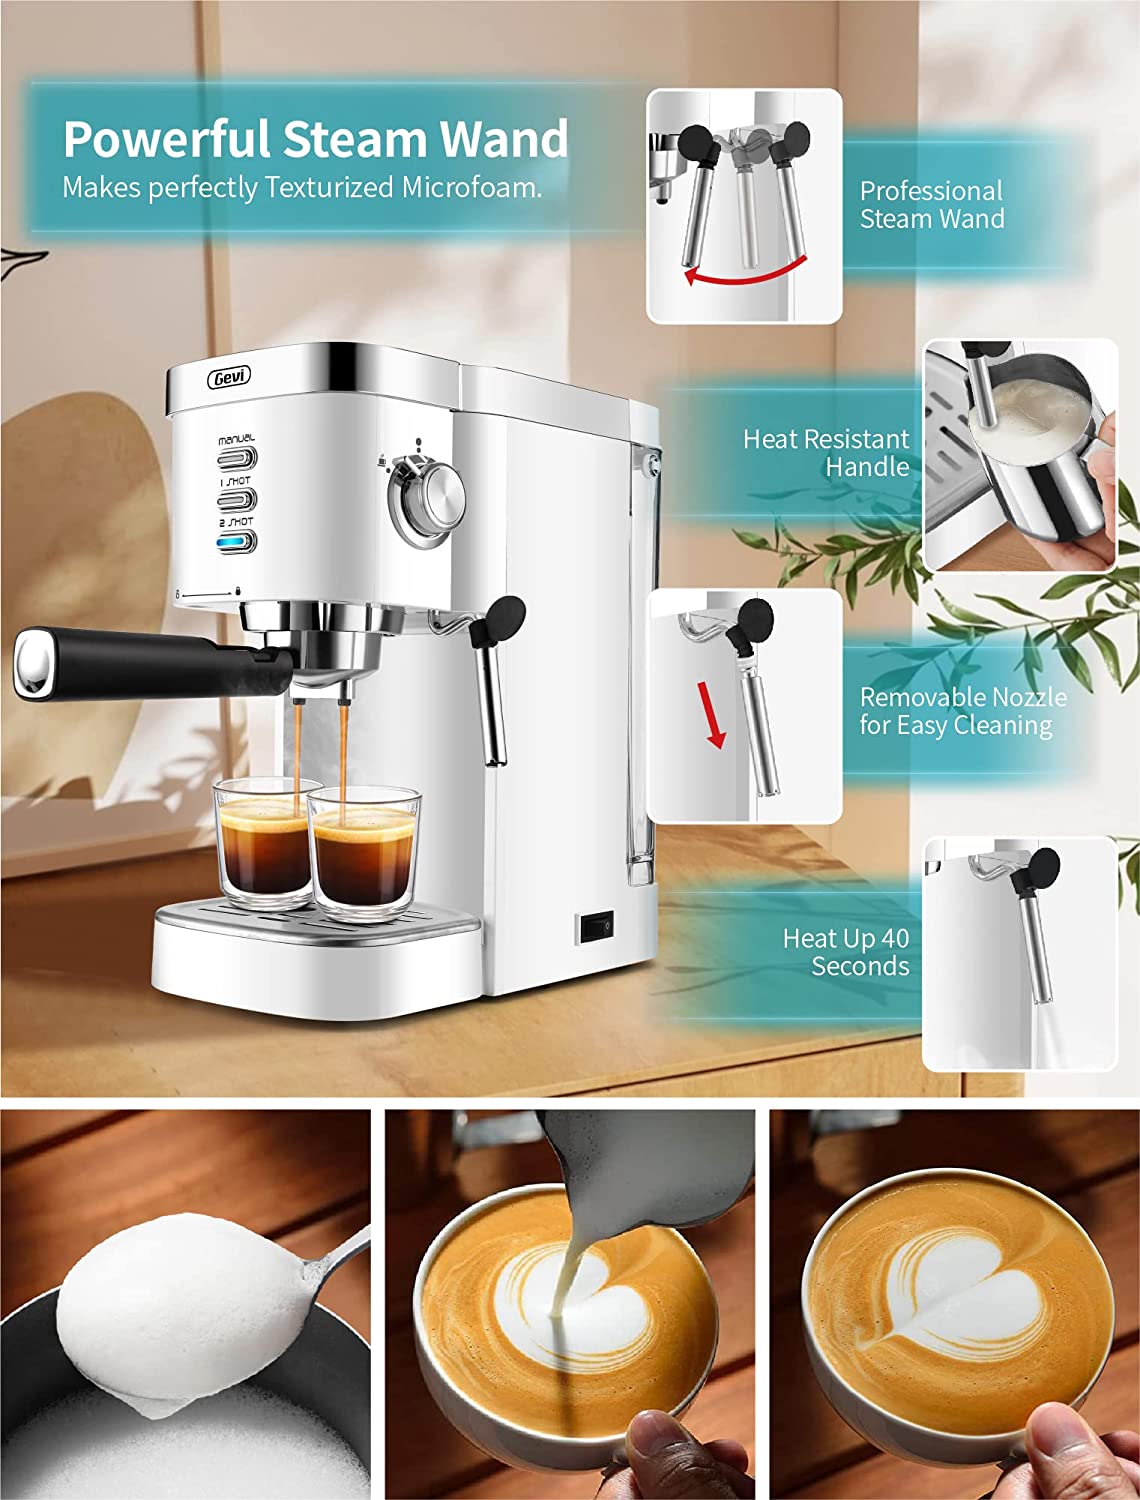 20 Bar Espresso Machine, 1350W Compact Espresso Cofee Machine for Home  Office, Stainless Steel Espresso Maker with Milk Frother for